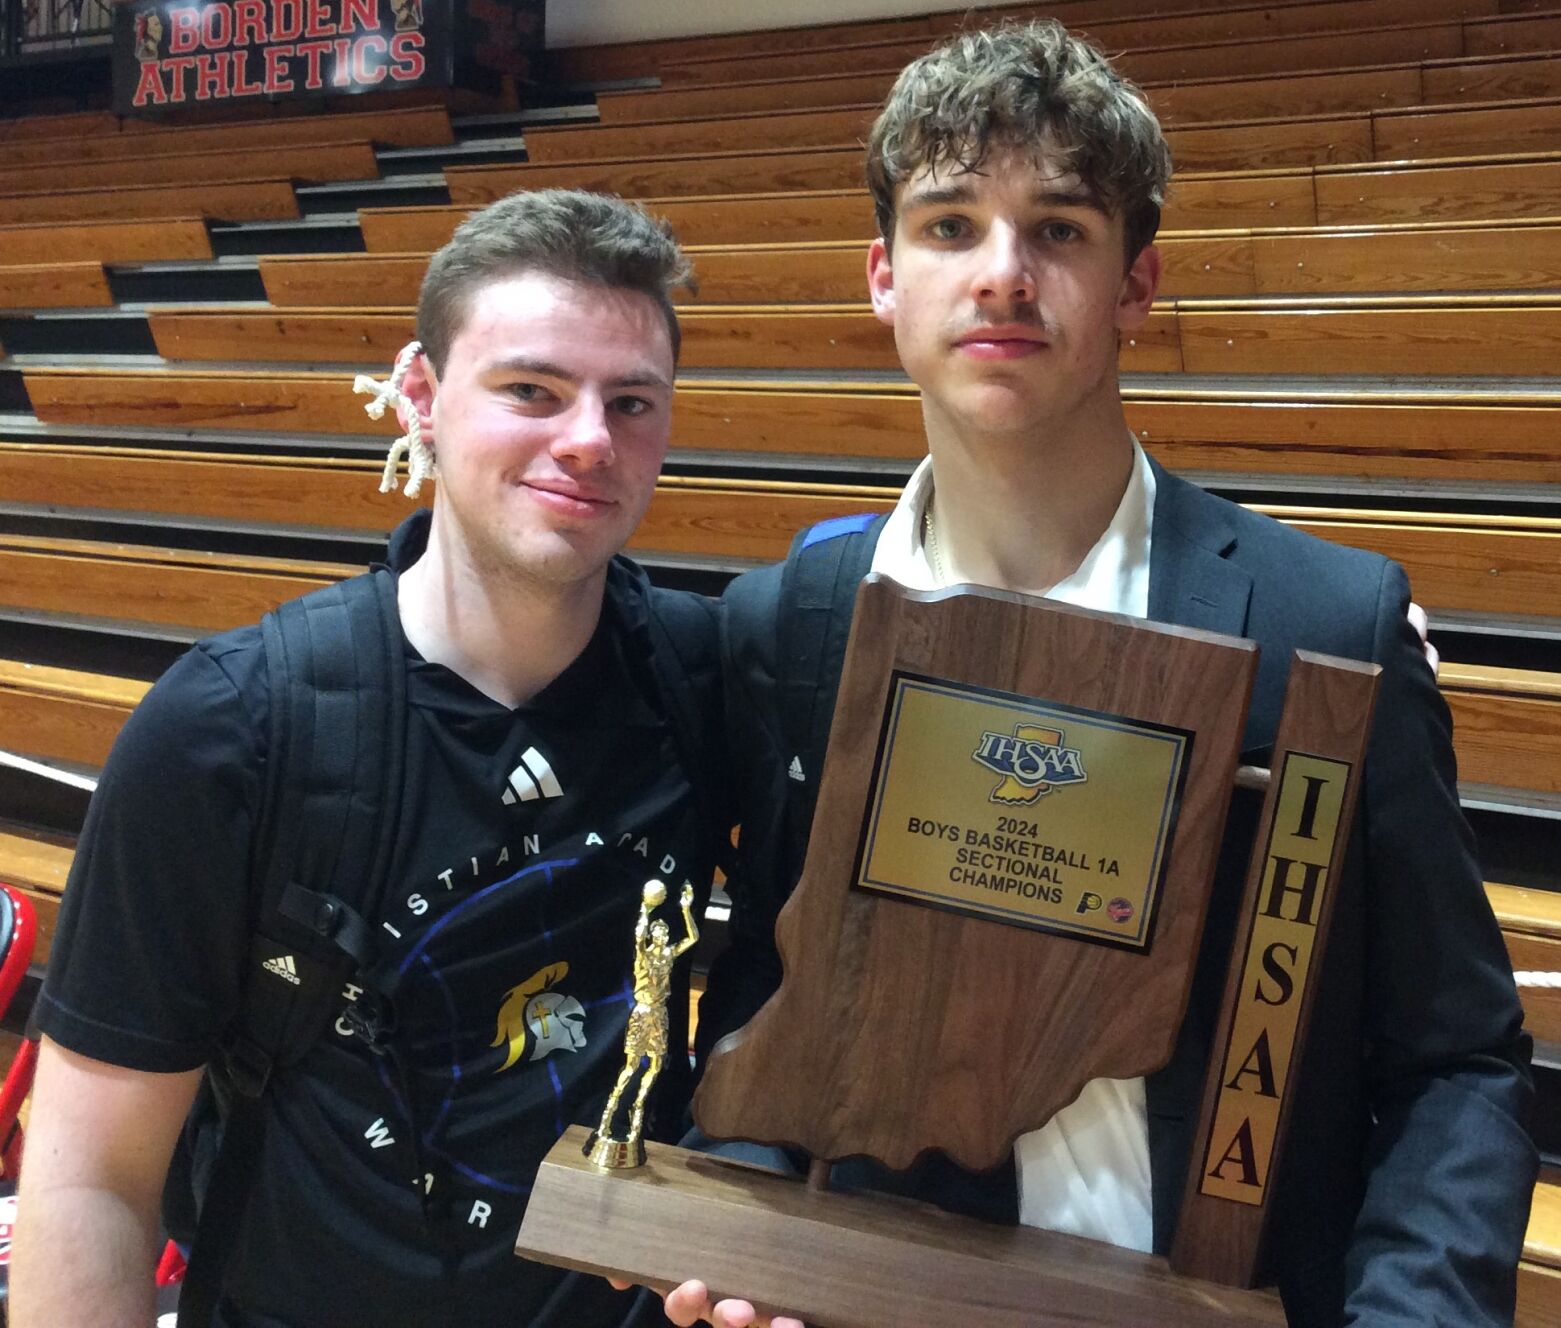 Christian Academy’s Seniors Nate Doss & Clinton Smith Key in Warriors’ Fourth Sectional Title Win